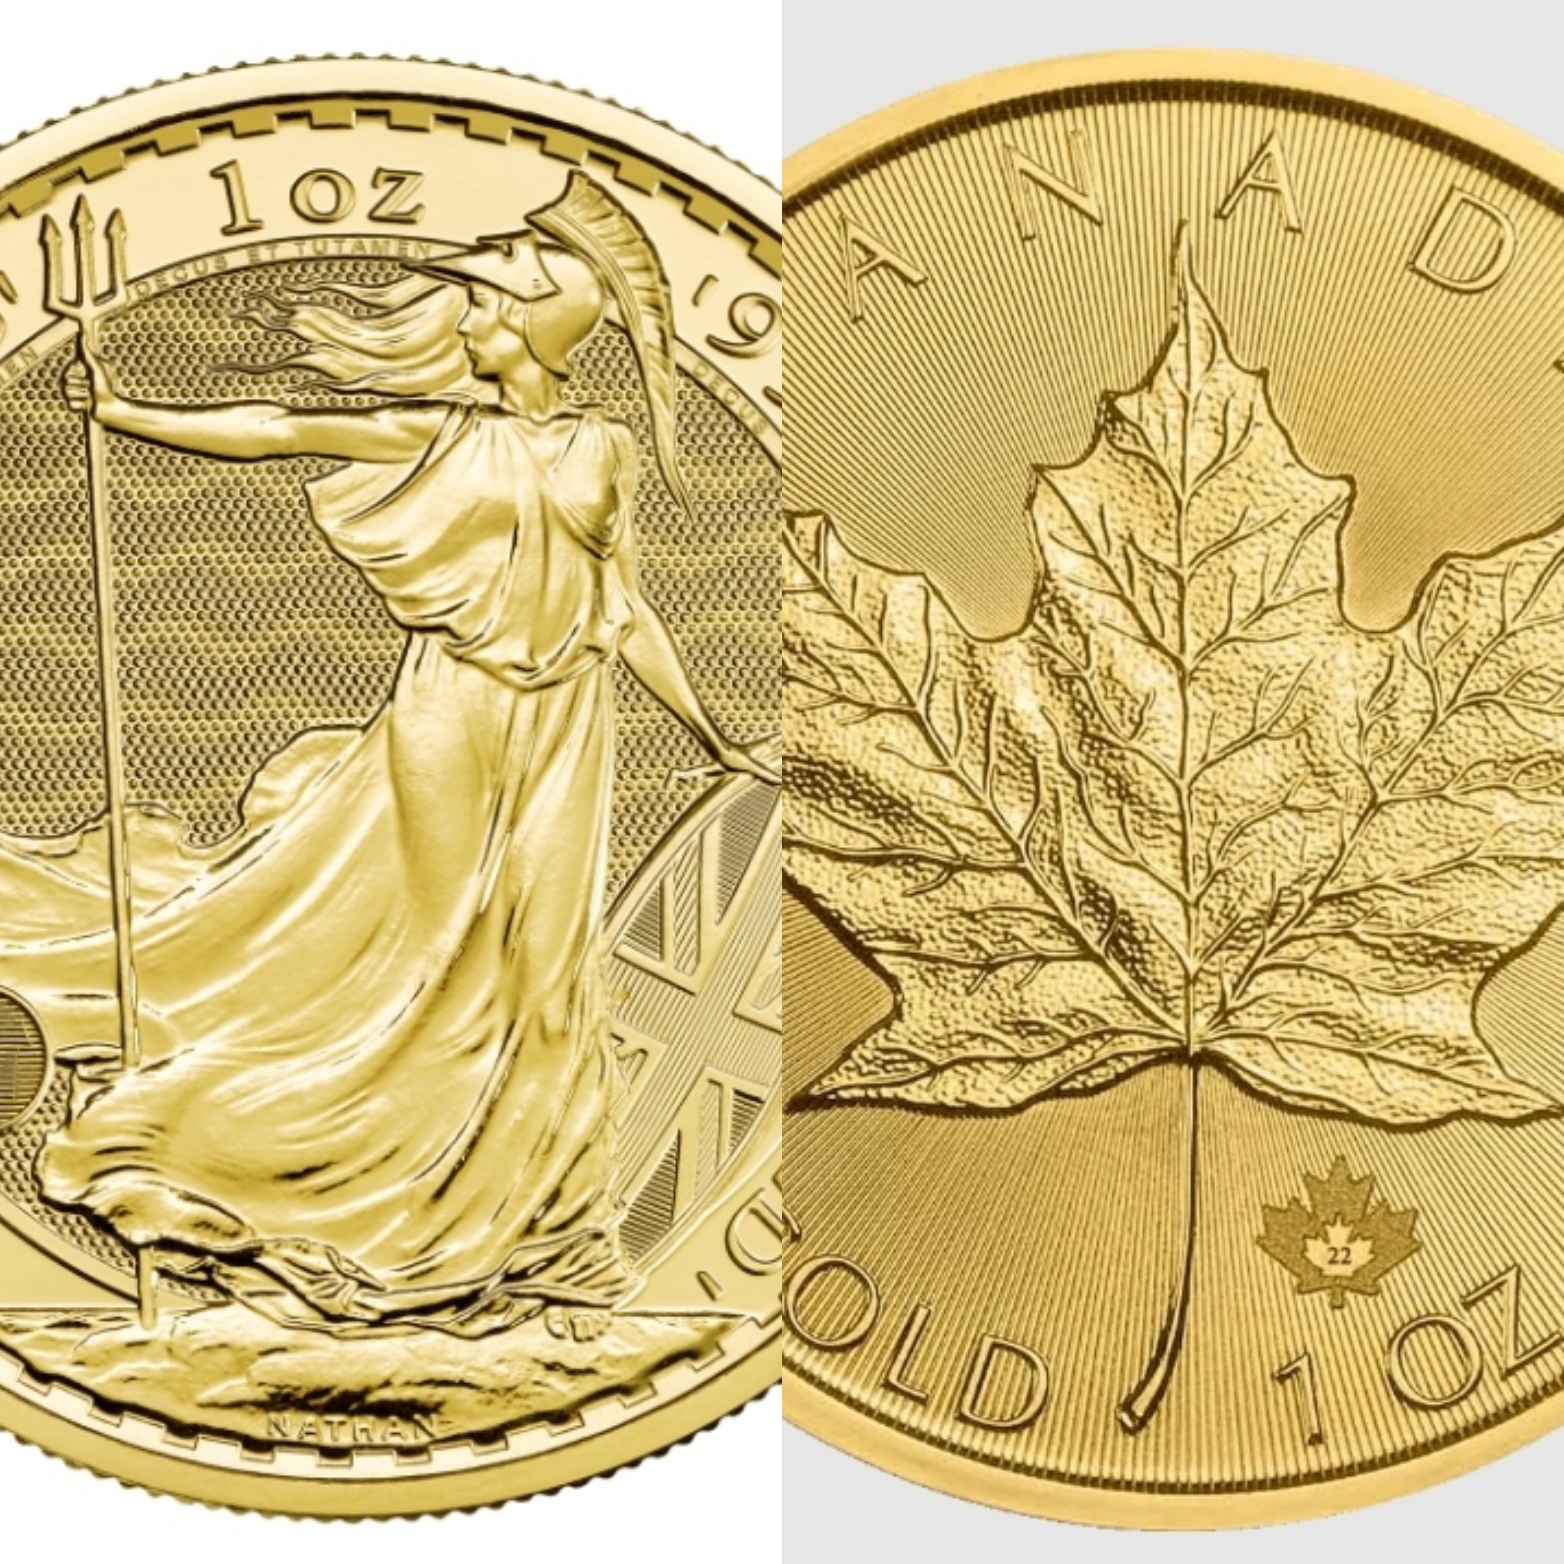 @welshstacker/the-great-coin-cup-britannia-vs-maple